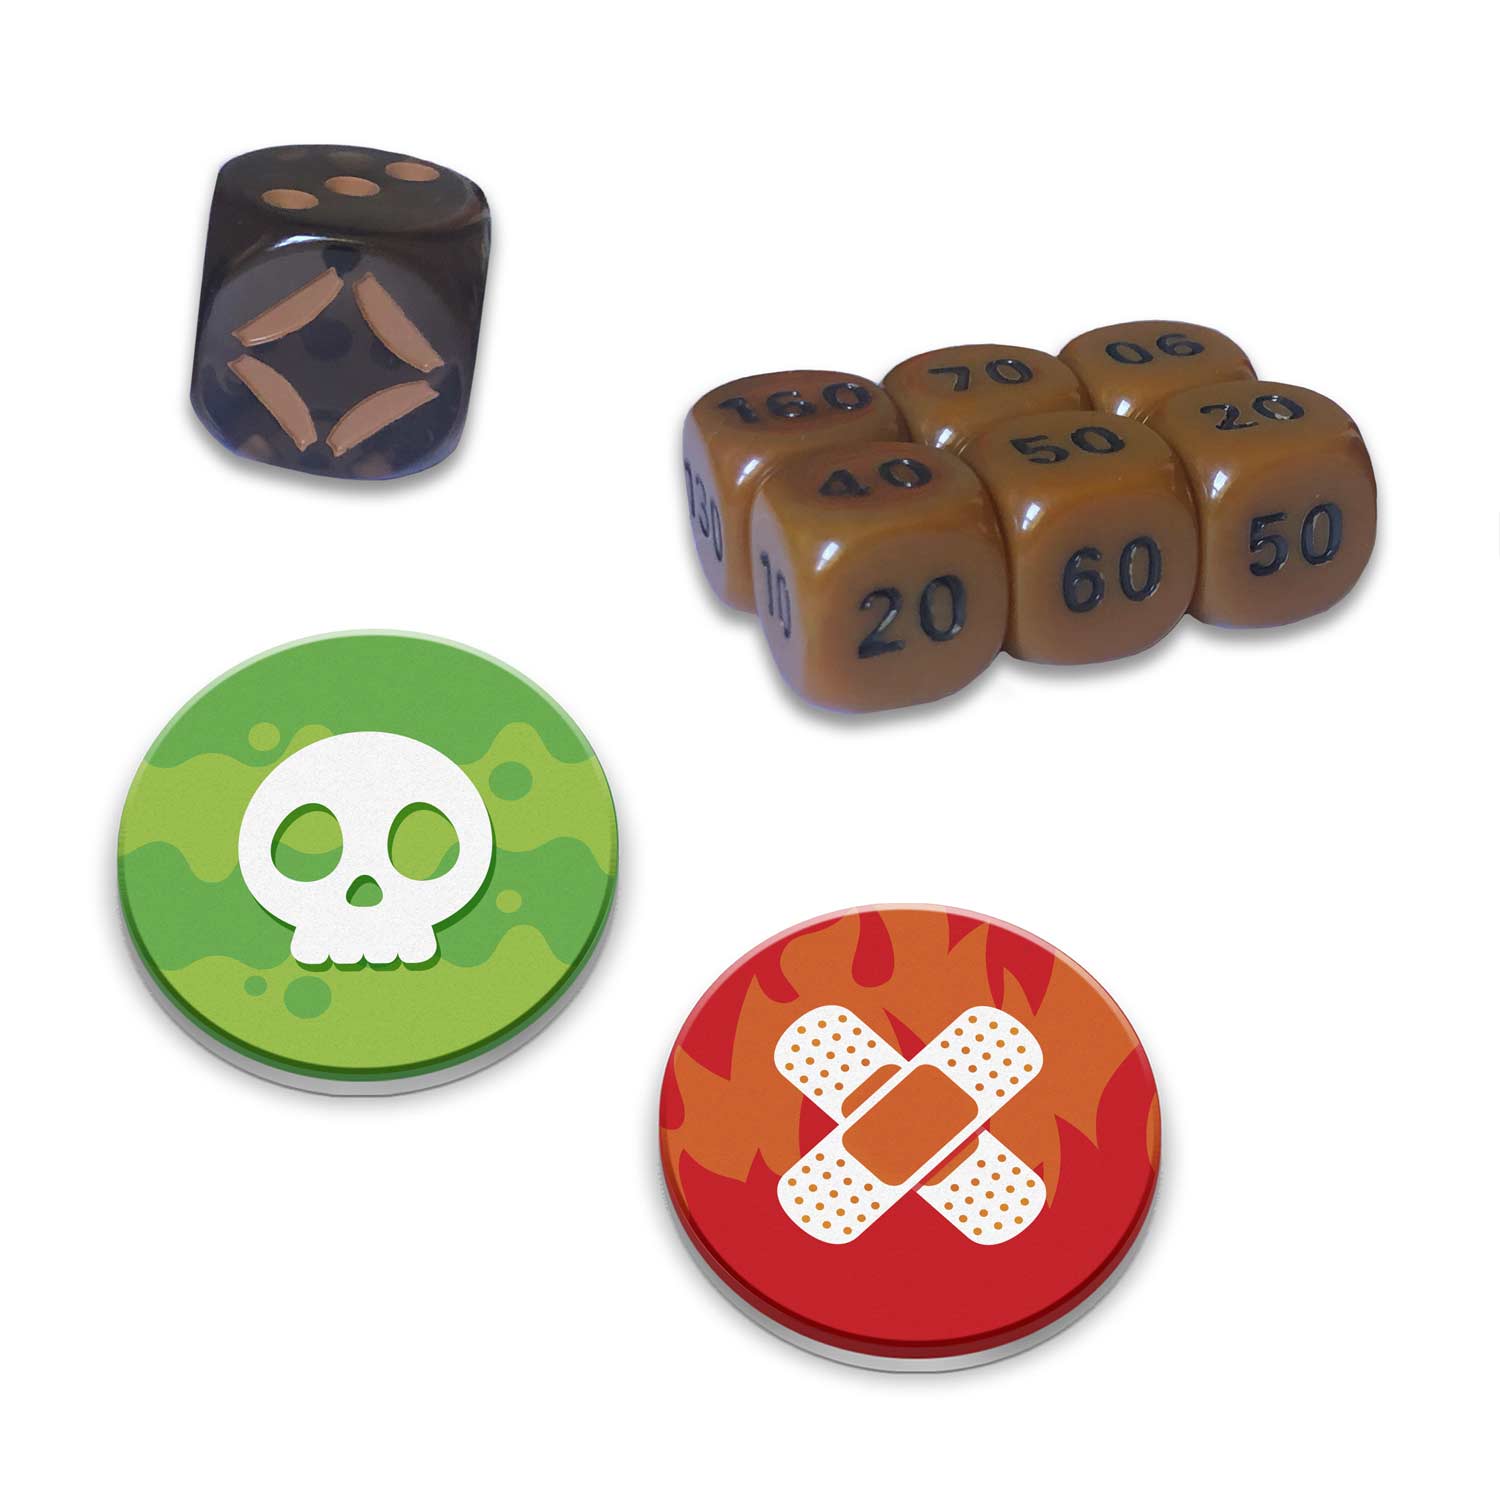 Damage counters, and dice are also included in the Elite Trainer Box.